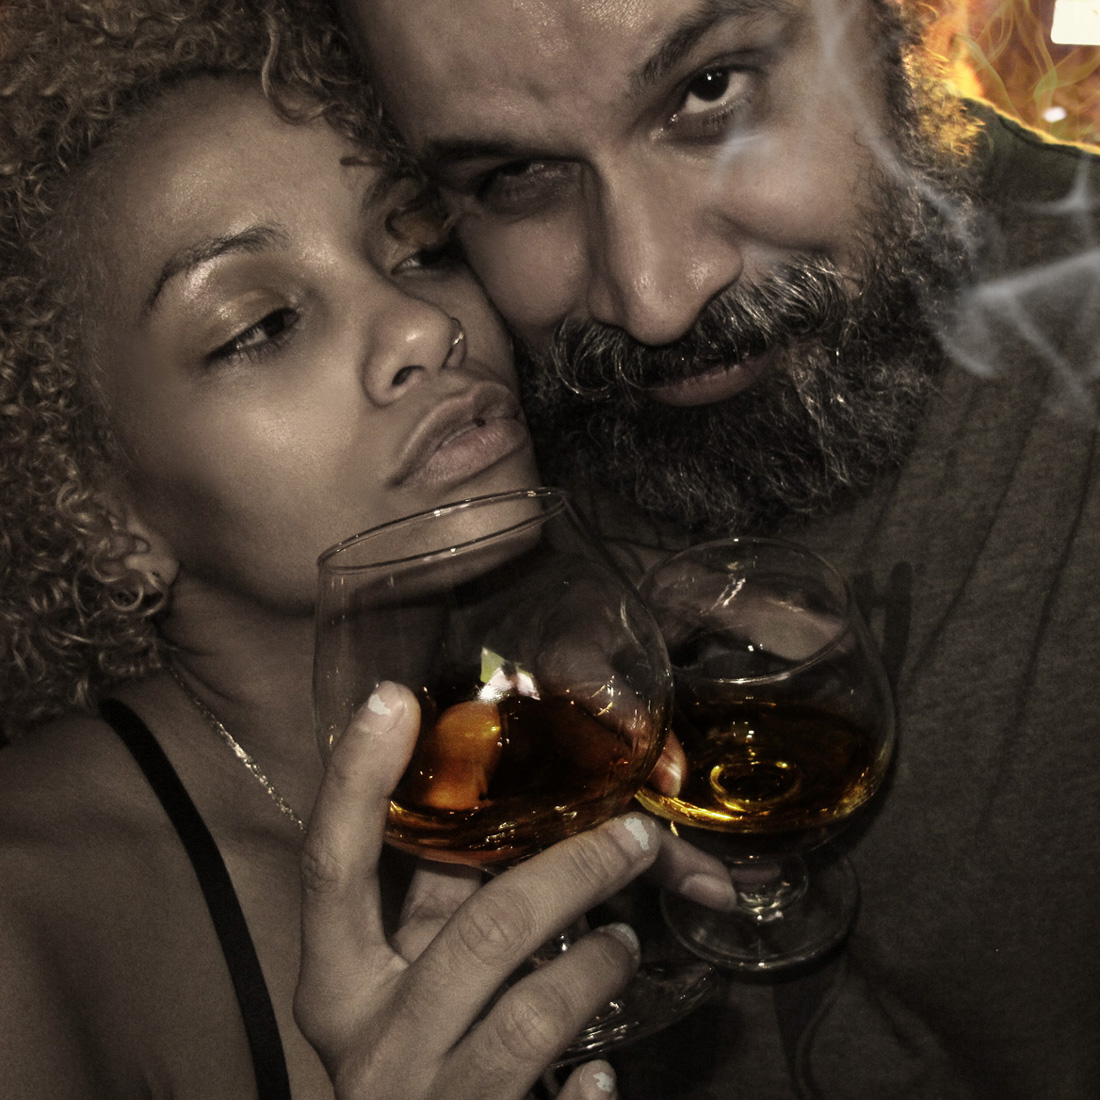 William Fuentes and Yomaylin Aylin Feliz like to drink the Fire water know as Scotch